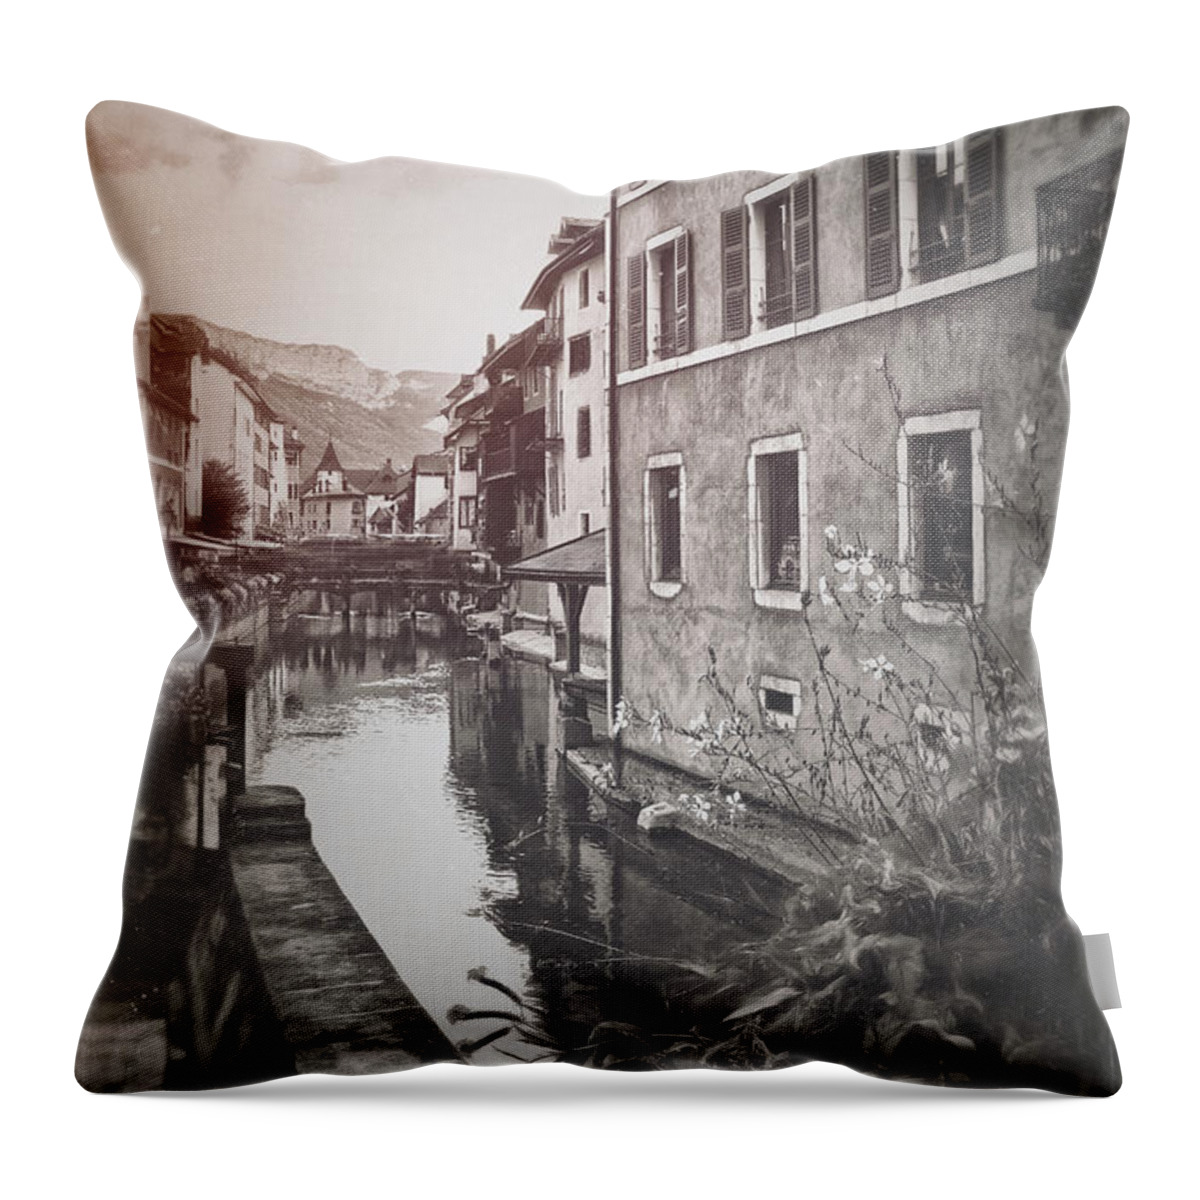 Annecy Throw Pillow featuring the photograph Annecy France European Canal Scenes Vintage Style by Carol Japp